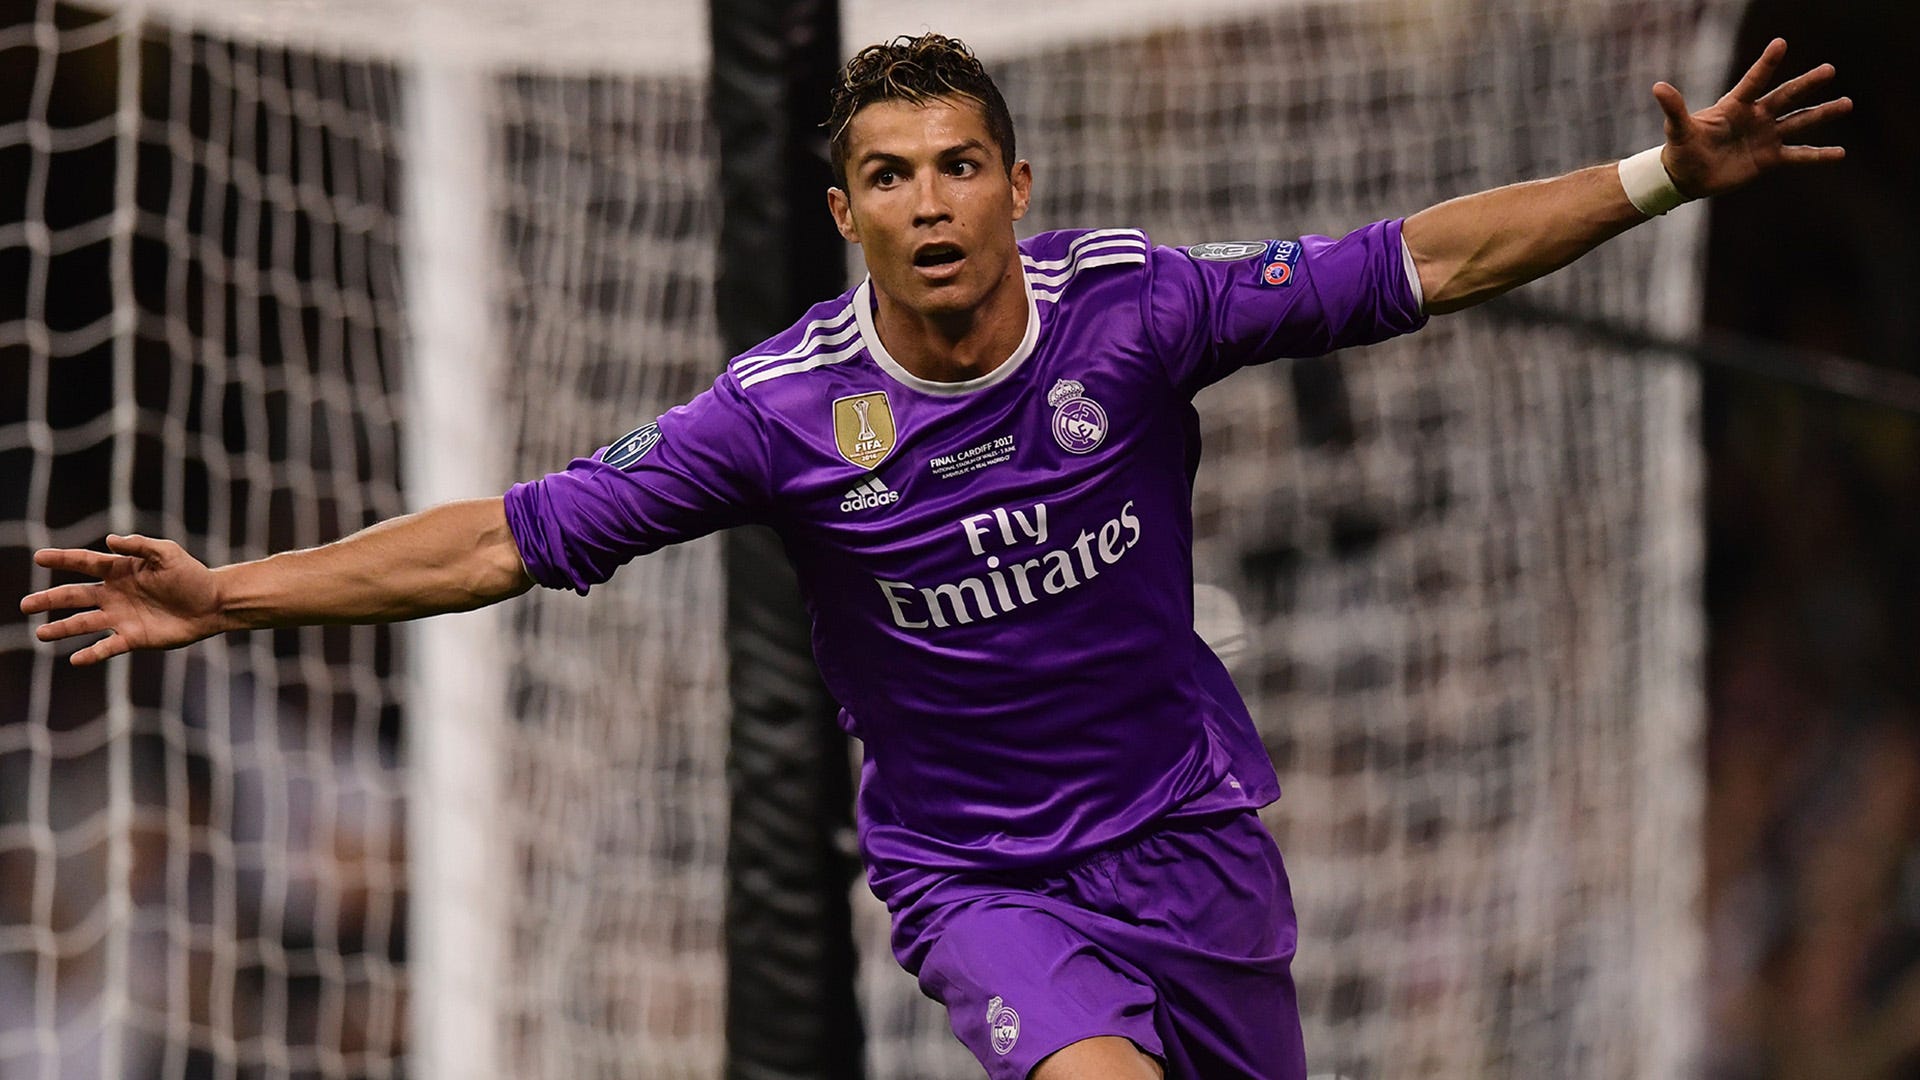 Real Madrid are not thinking about selling Cristiano Ronaldo president  Florentino Perez insists  Football News  Sky Sports